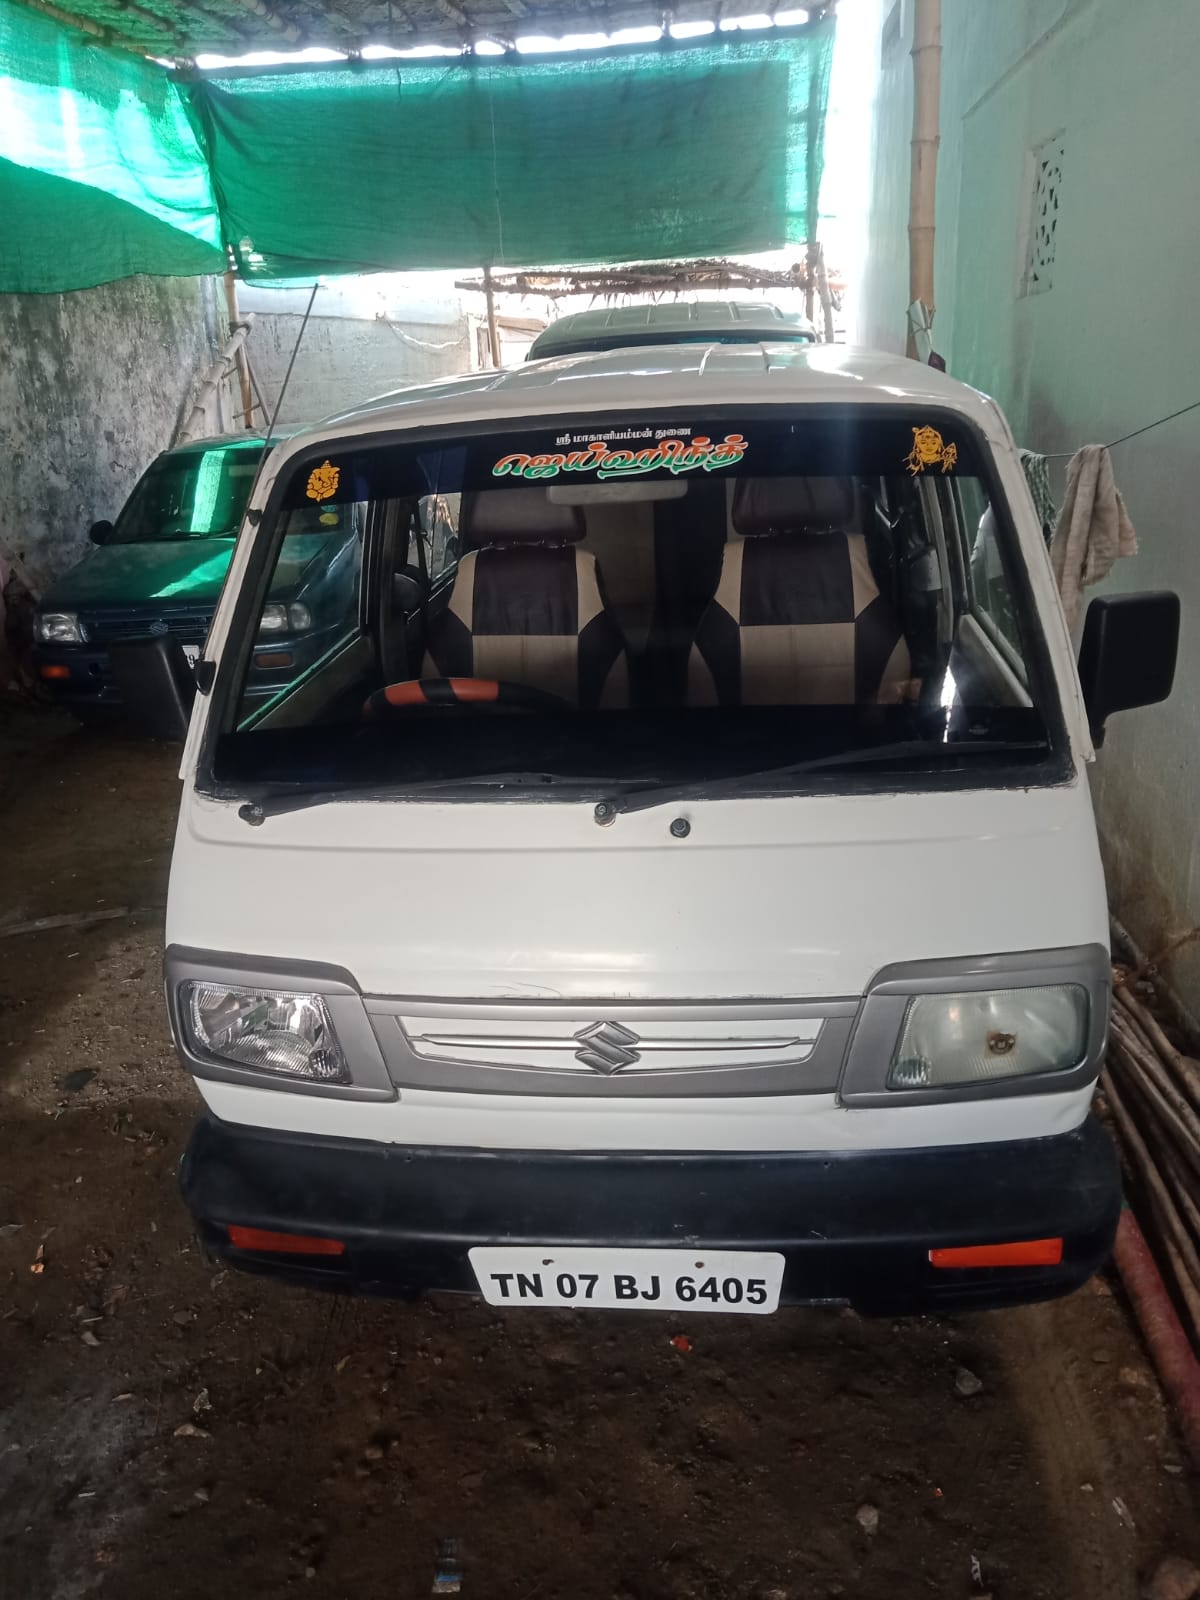 4326-for-sale-Maruthi-Suzuki-Omni-Petrol-First-Owner-2010-TN-registered-rs-178000